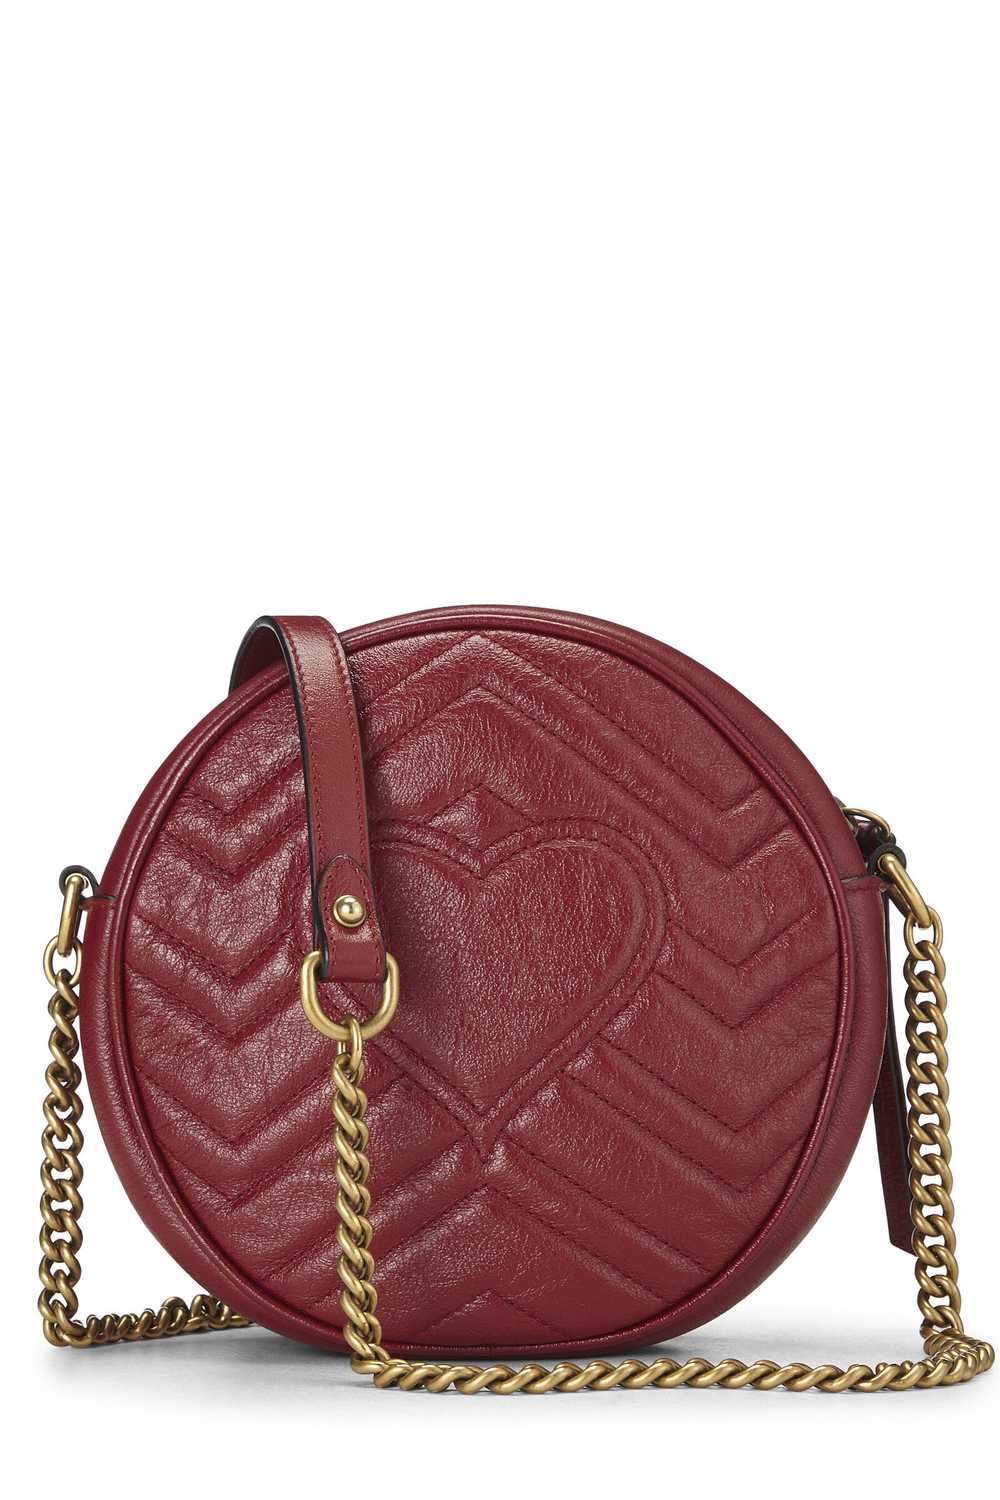 Red Leather GG Marmont Round Shoulder Bag Mini - image 4